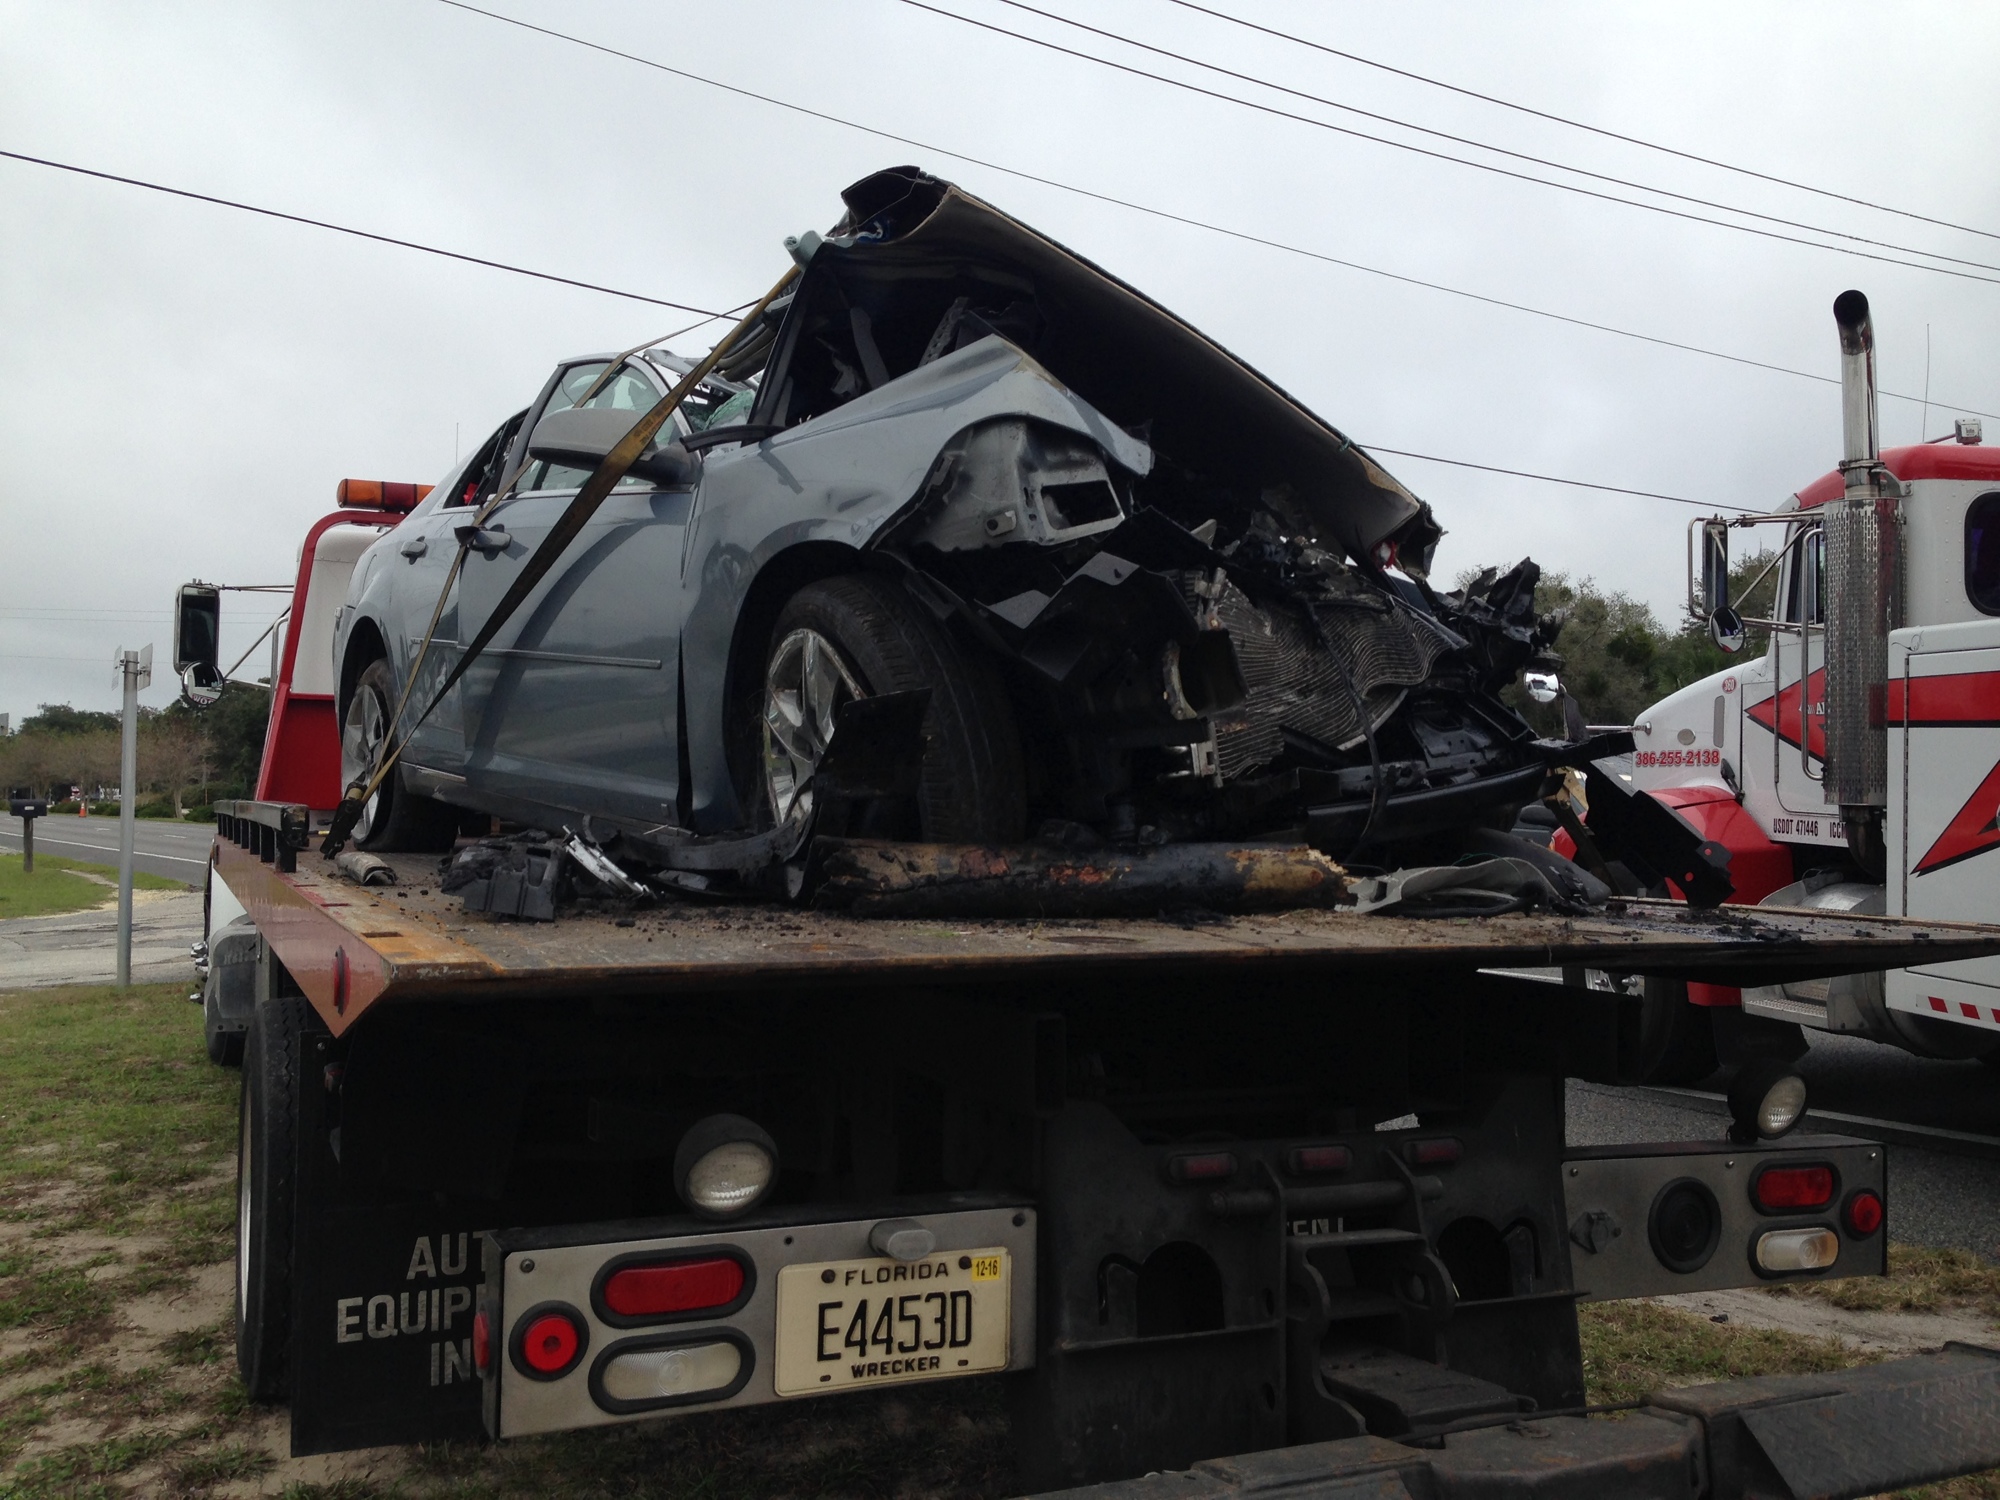 Two people were seriously injured in a car on North U.S. 1 on Dec. 7.